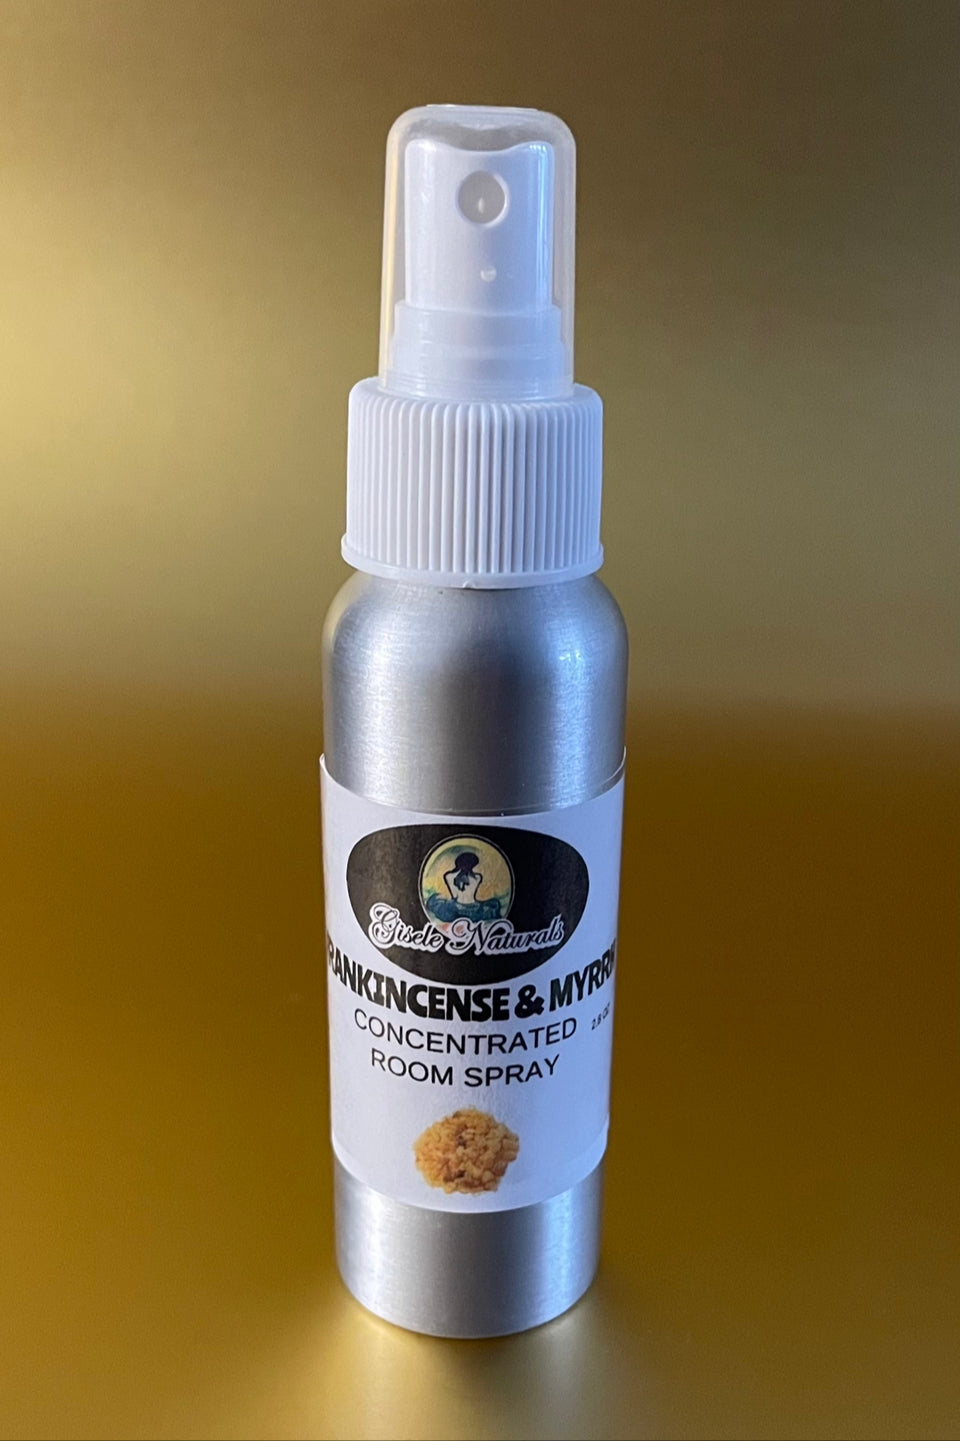 Frankincense and myrrh Concentrated room spray